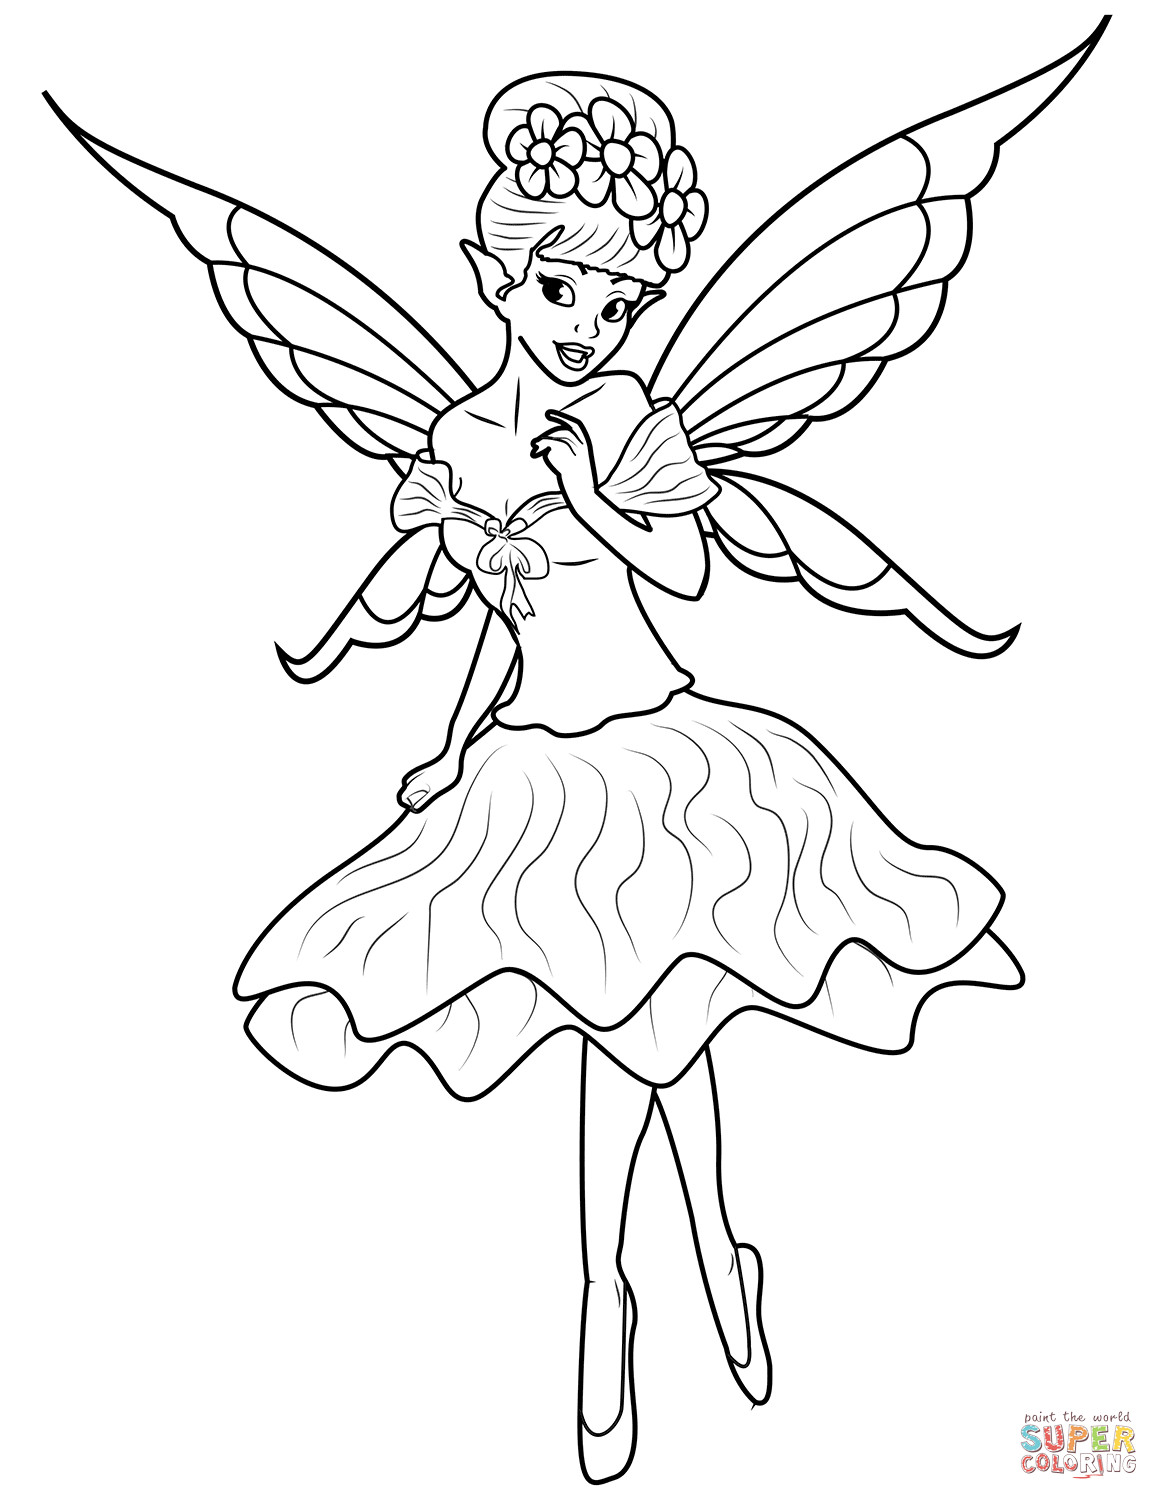 Printable Fairies Coloring Pages
 Fairy coloring page